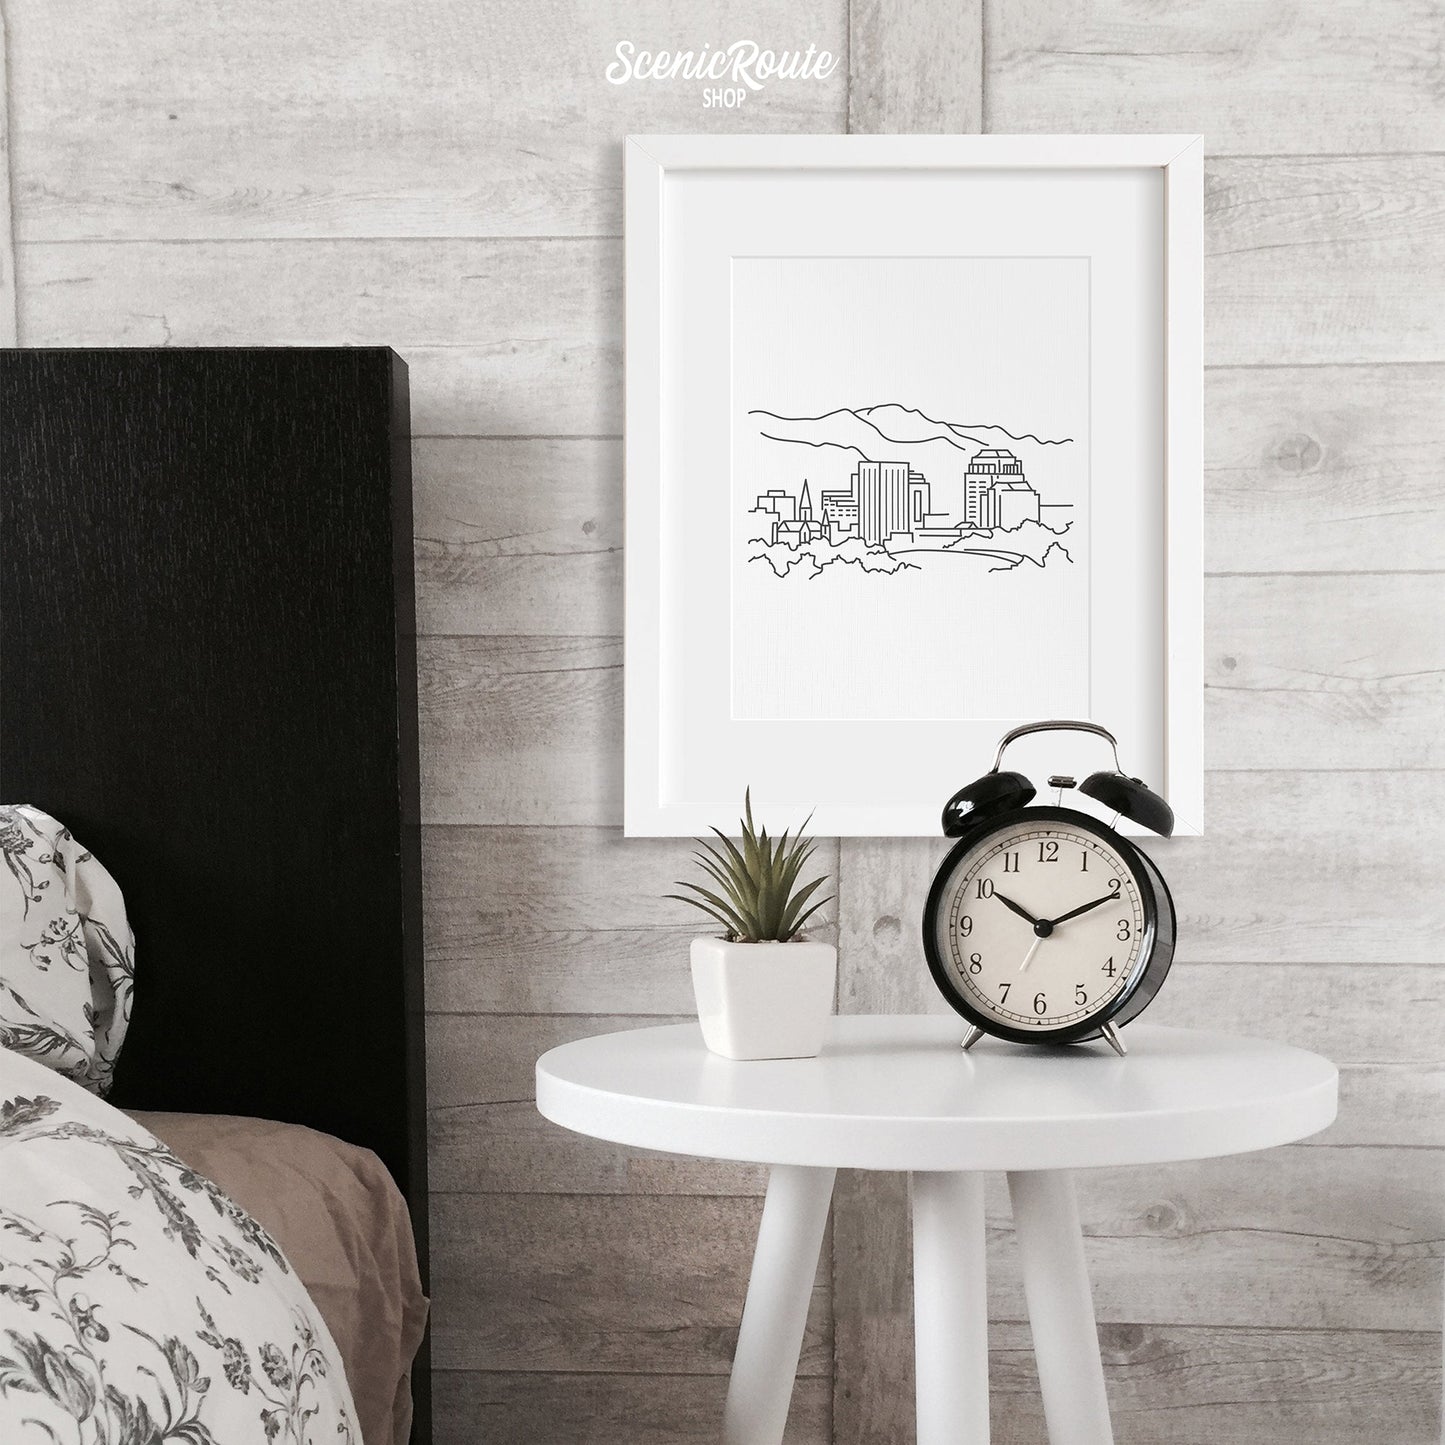 A framed line art drawing of the Colorado Springs Skyline above a nightstand next to a bed